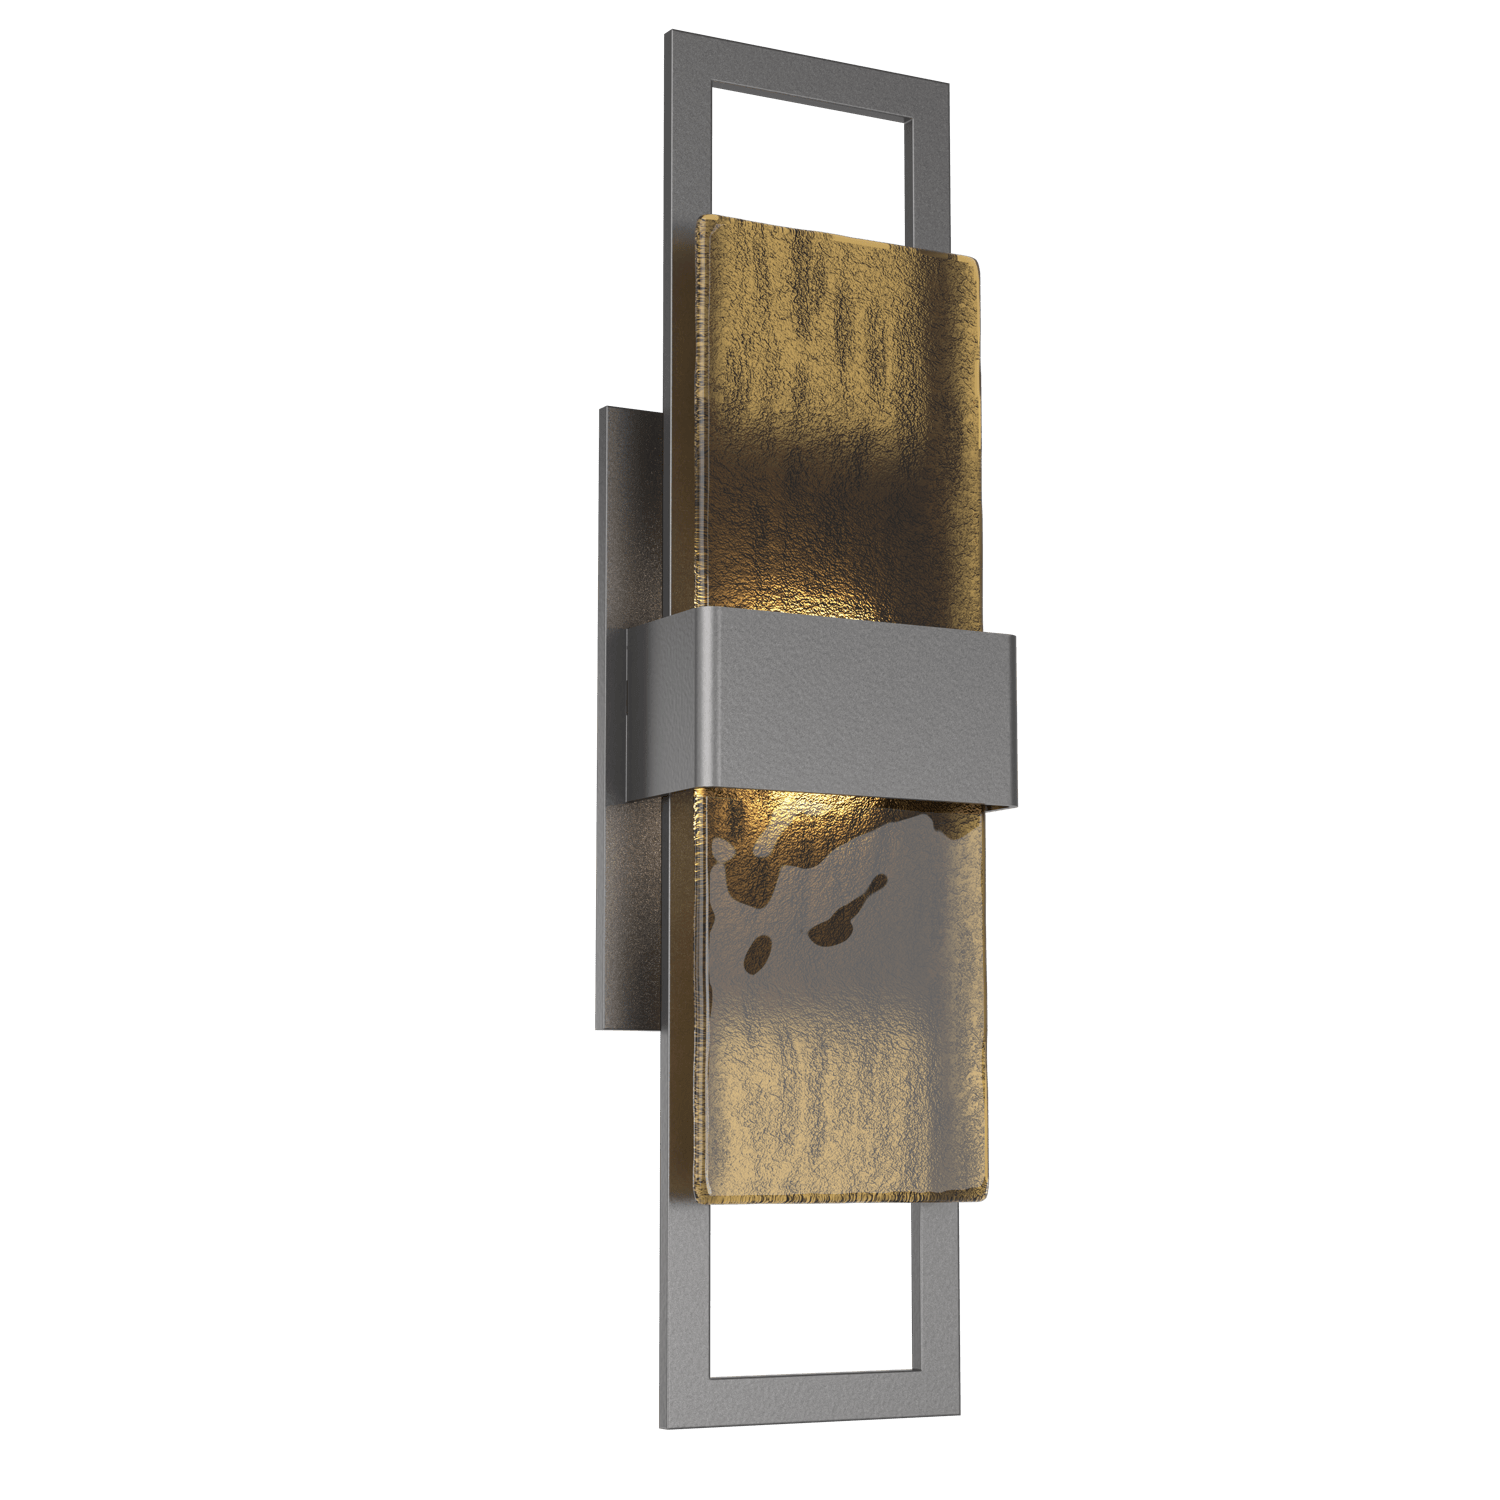 ODB0085-01-AG-BG-Hammerton-Studio-Sasha-20-inch-outdoor-sconce-with-argento-grey-finish-and-bronze-granite-glass-shades-and-LED-lamping